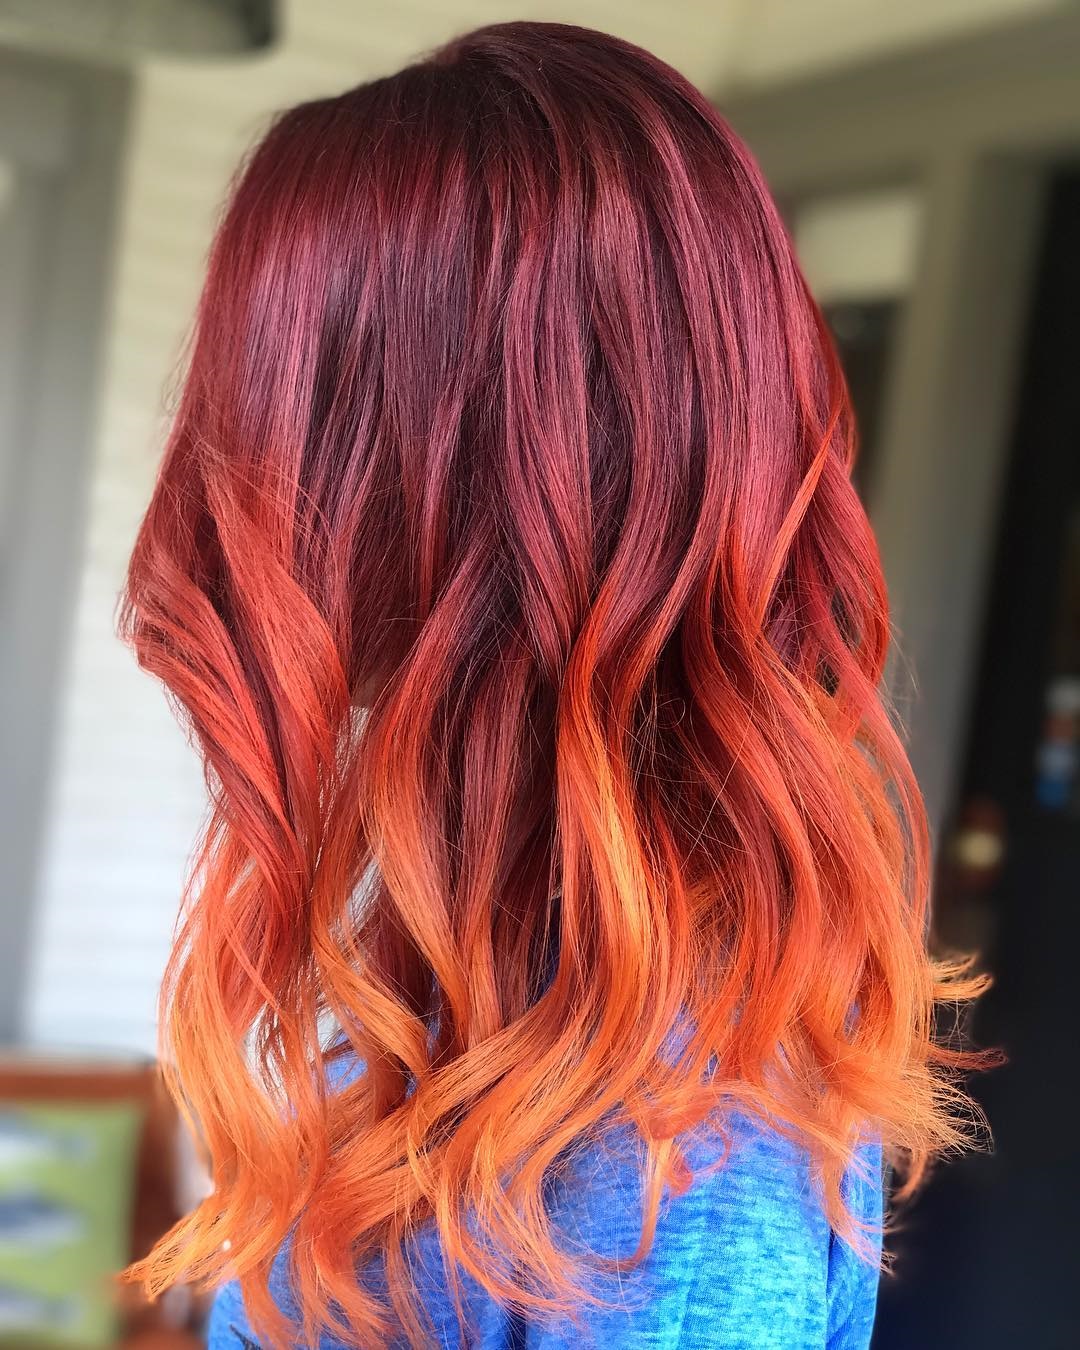 30 Hottest Ombre Hair Color Ideas 2018 - Photos of Best Ombre